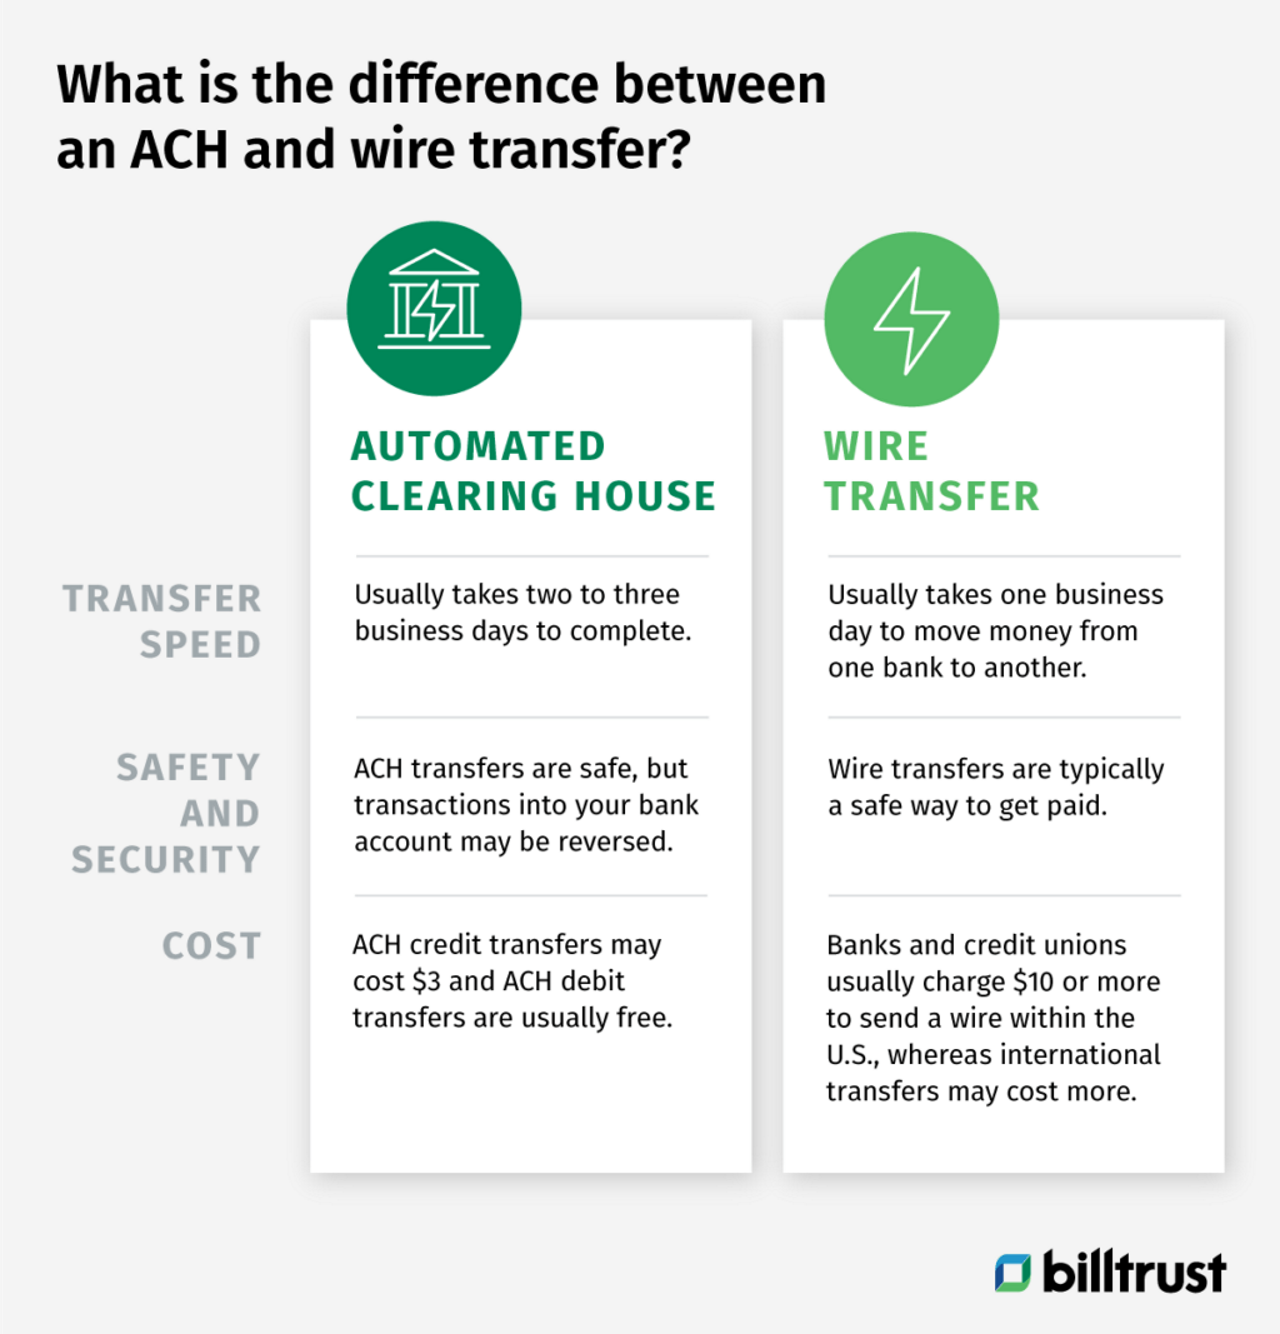 the difference between and ACH and wire transfer